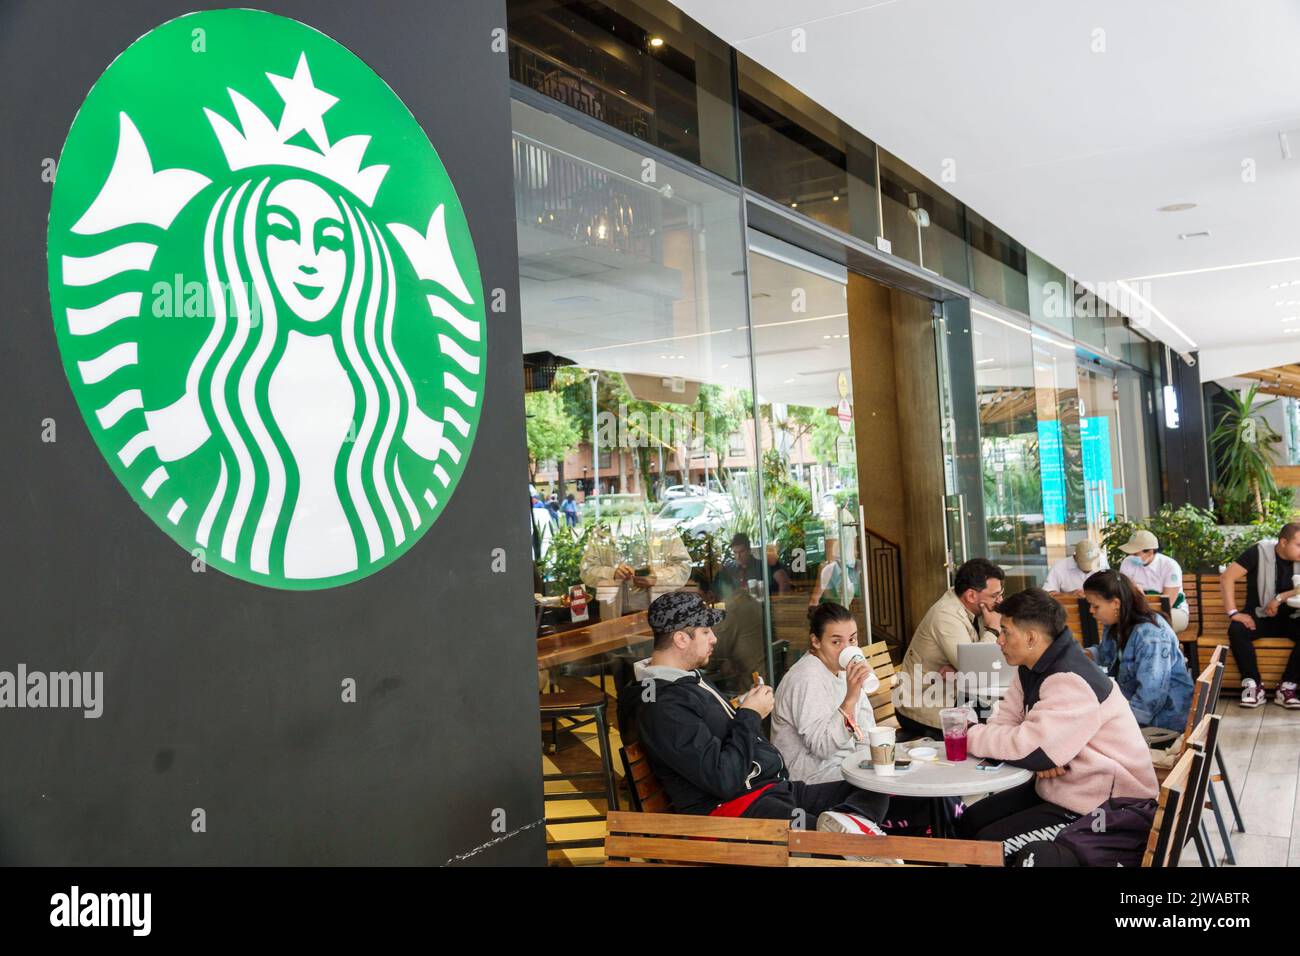 Bogota Colombia,El Chico Carrera 13 Starbucks Coffee Parque 93,restaurant restaurants dine dining eating out casual cafe cafes bistro bistros food,Col Stock Photo